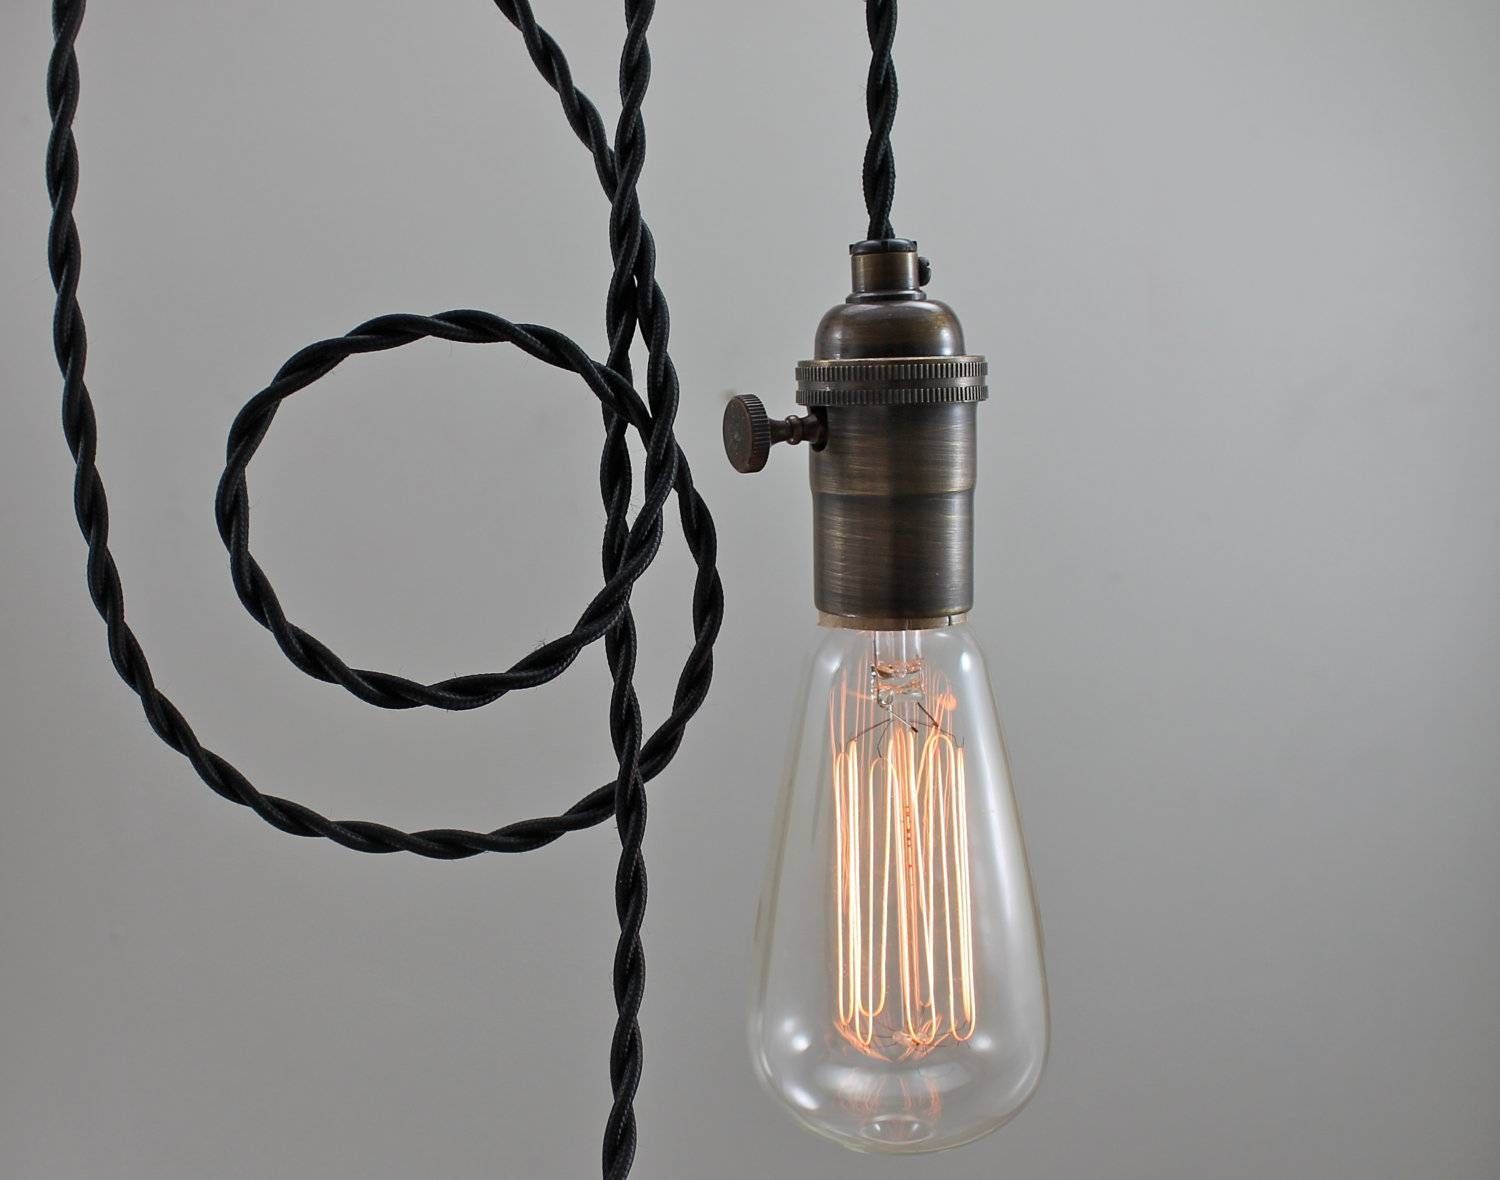 Modern Edison Pendant Light — All About Home Design : Edison With Edison Bulb Pendant Lights (View 15 of 15)